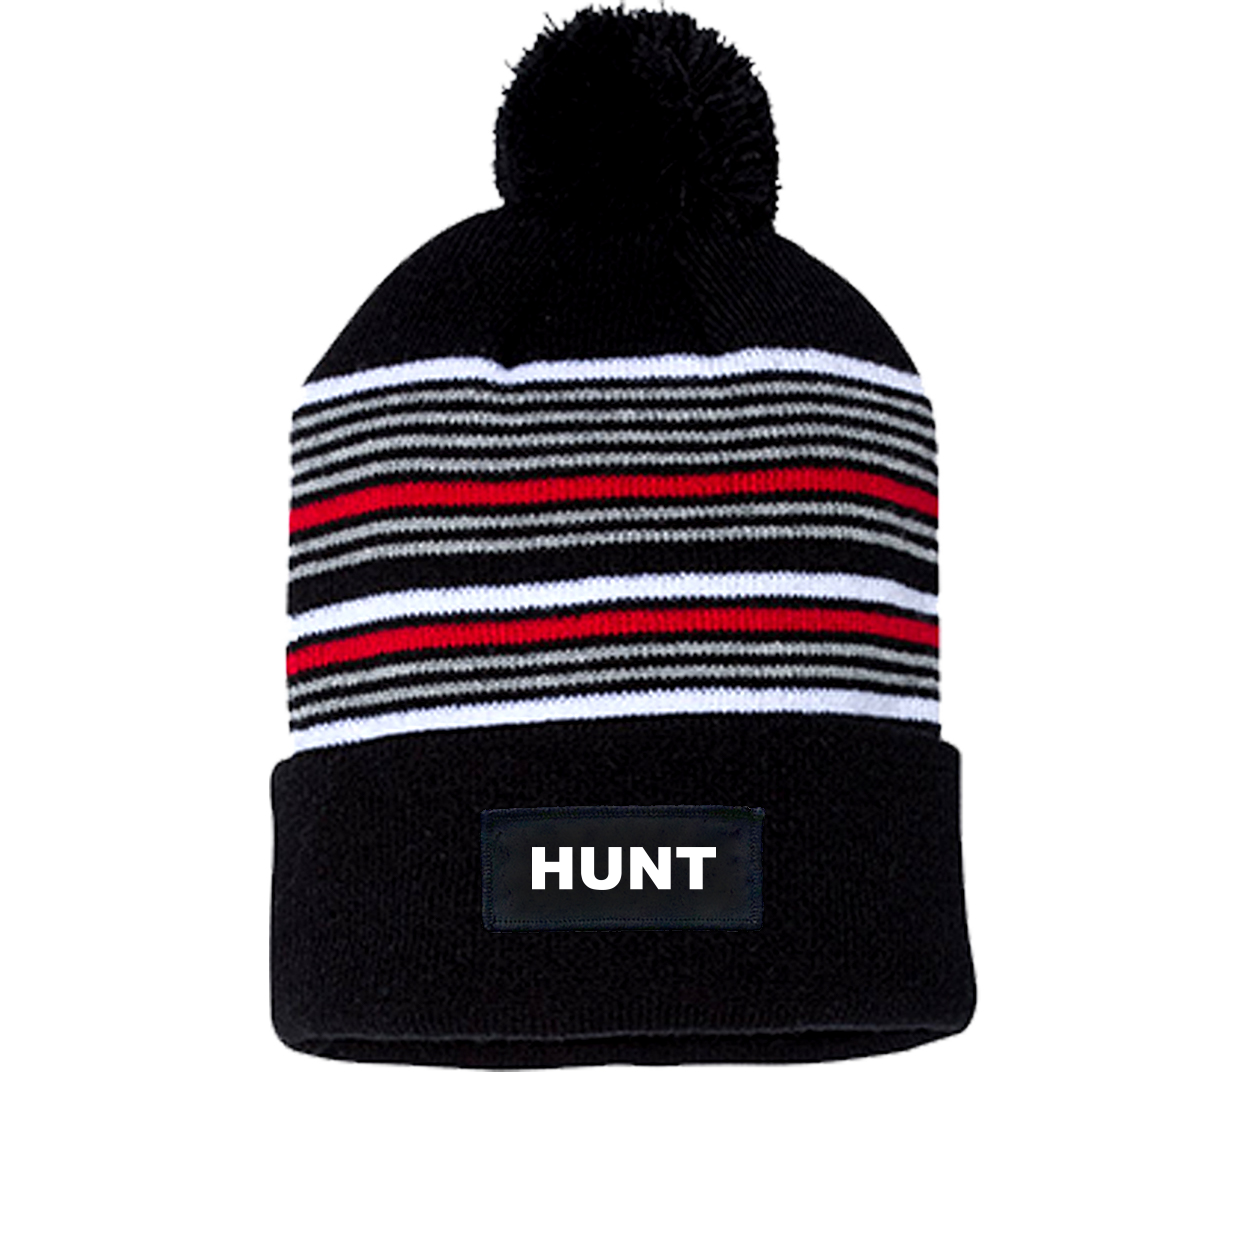 Hunt Brand Logo Night Out Woven Patch Roll Up Pom Knit Beanie Black/ White/ Grey/ Red Beanie